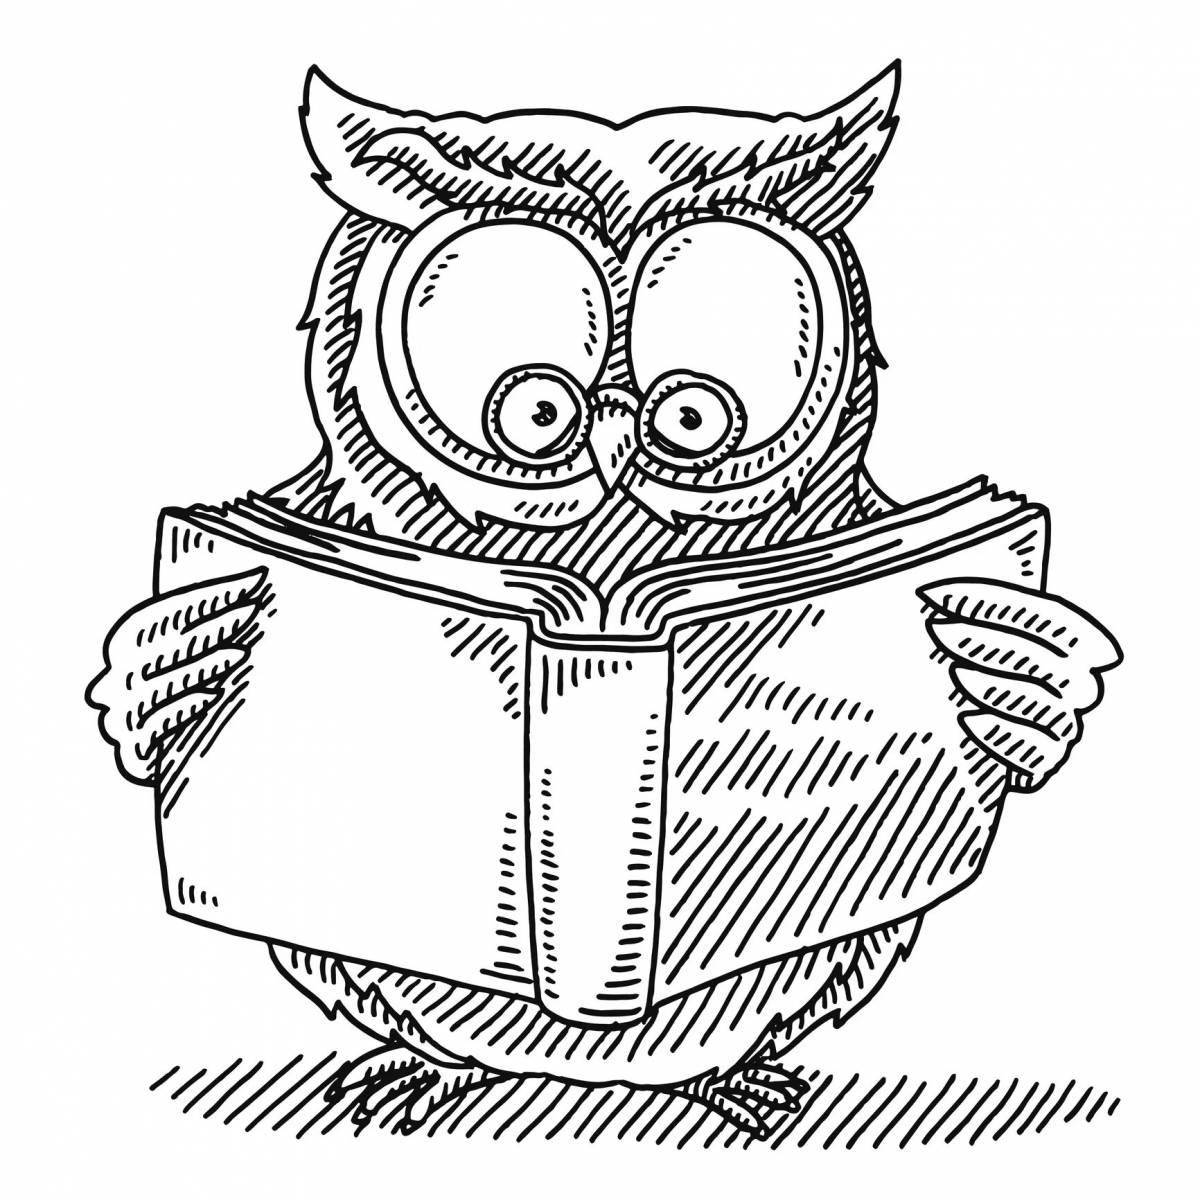 Charming wise owl coloring book for kids